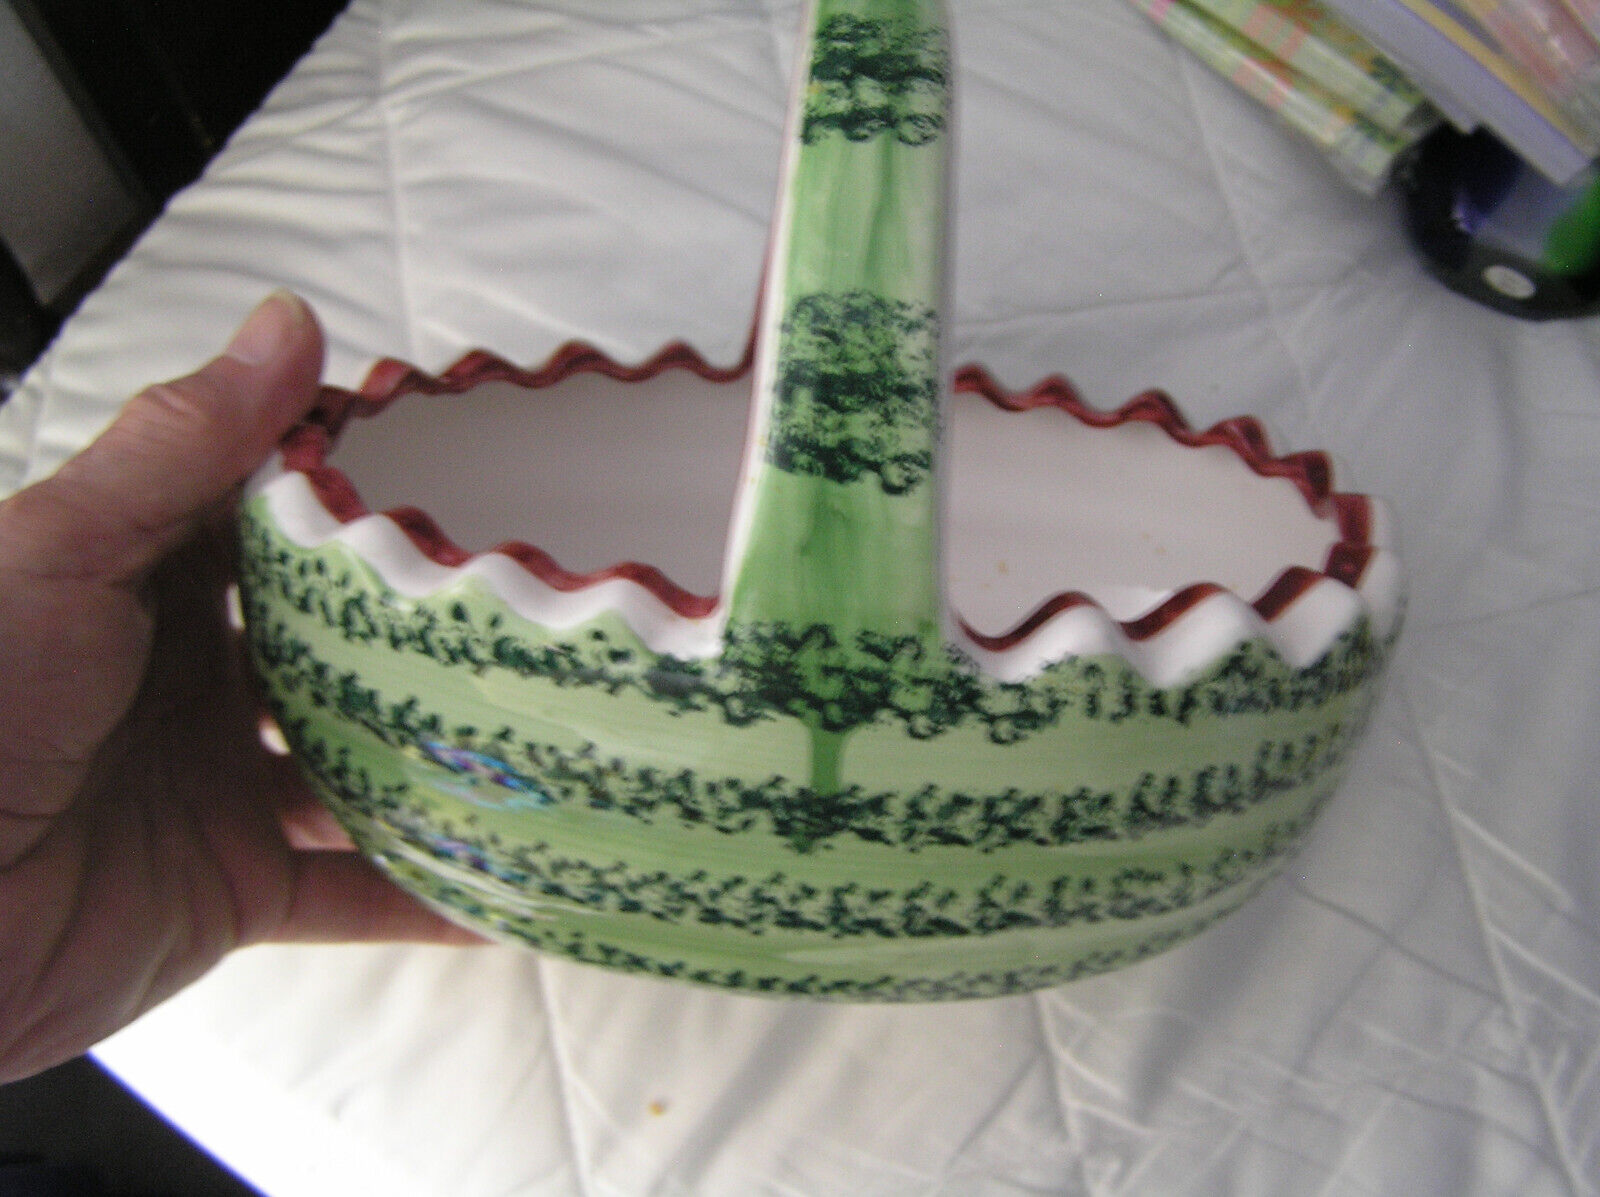 CERAMIC BASKET SHAPED LIKE 1/2 WATERMELON BY NEW HOLLAND FLORAL ABOUT 9X6X8 HIGH